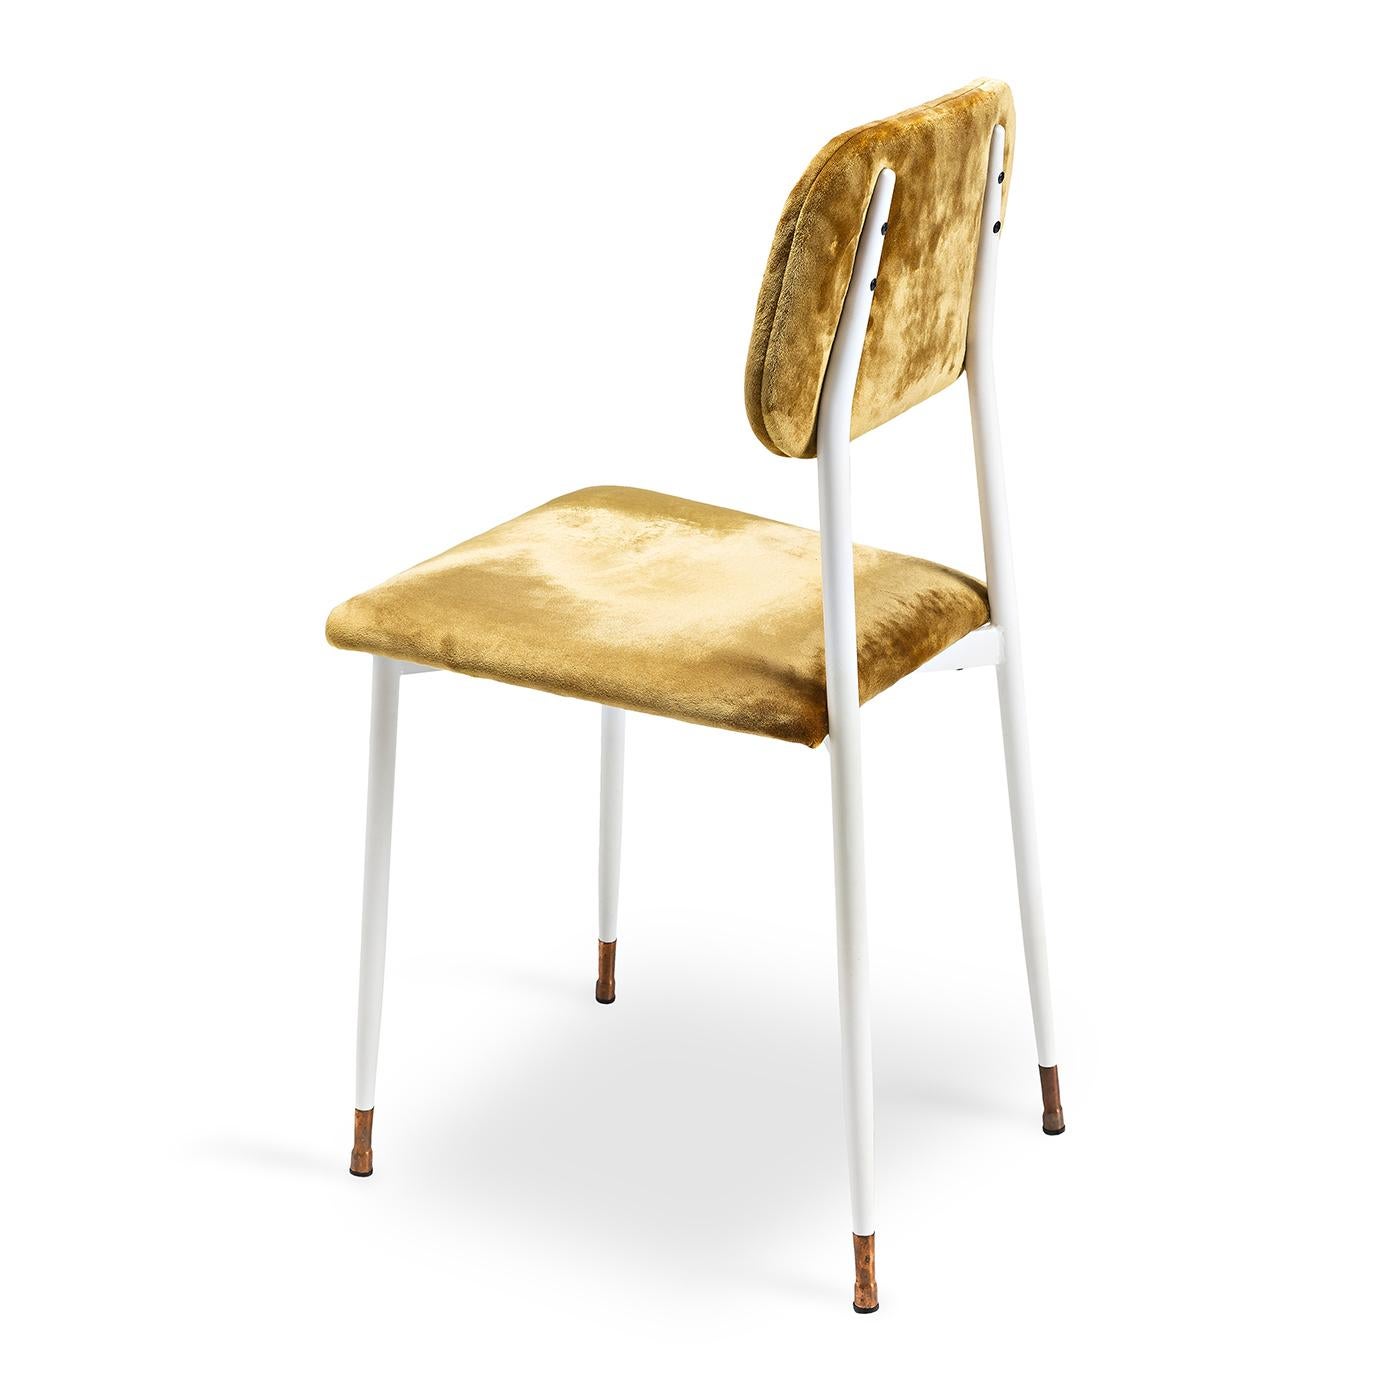 Classy, simple and a bit vintage, this dining chair has a simple metal frame and legs that are finished in a snow-white matte paint, while the bottoms of the legs are decorated with brass chair guides. Its back and seat, structured with polyurethane